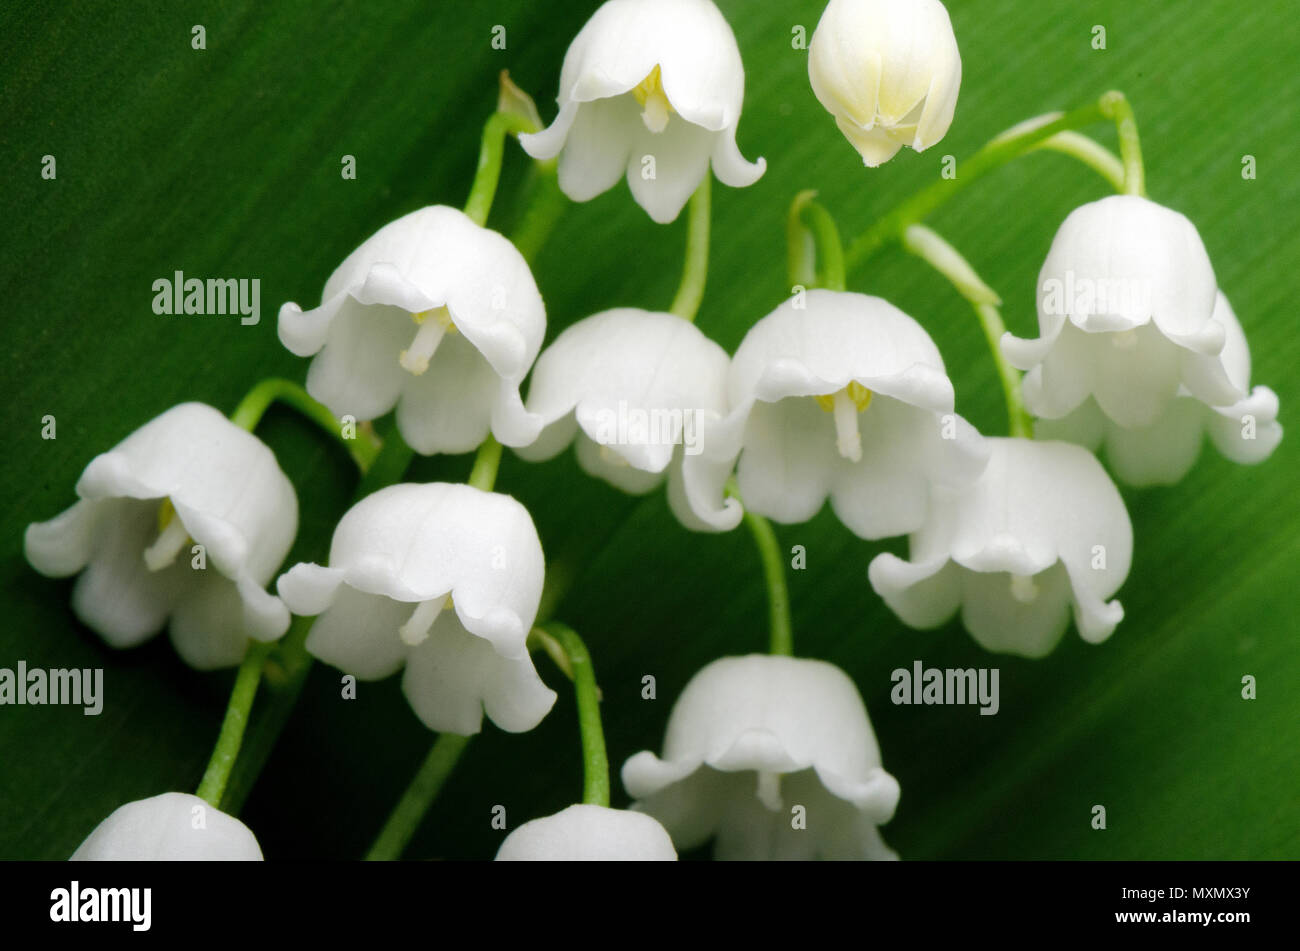 Lily of the valley or Convallaria majalis L Stock Photo